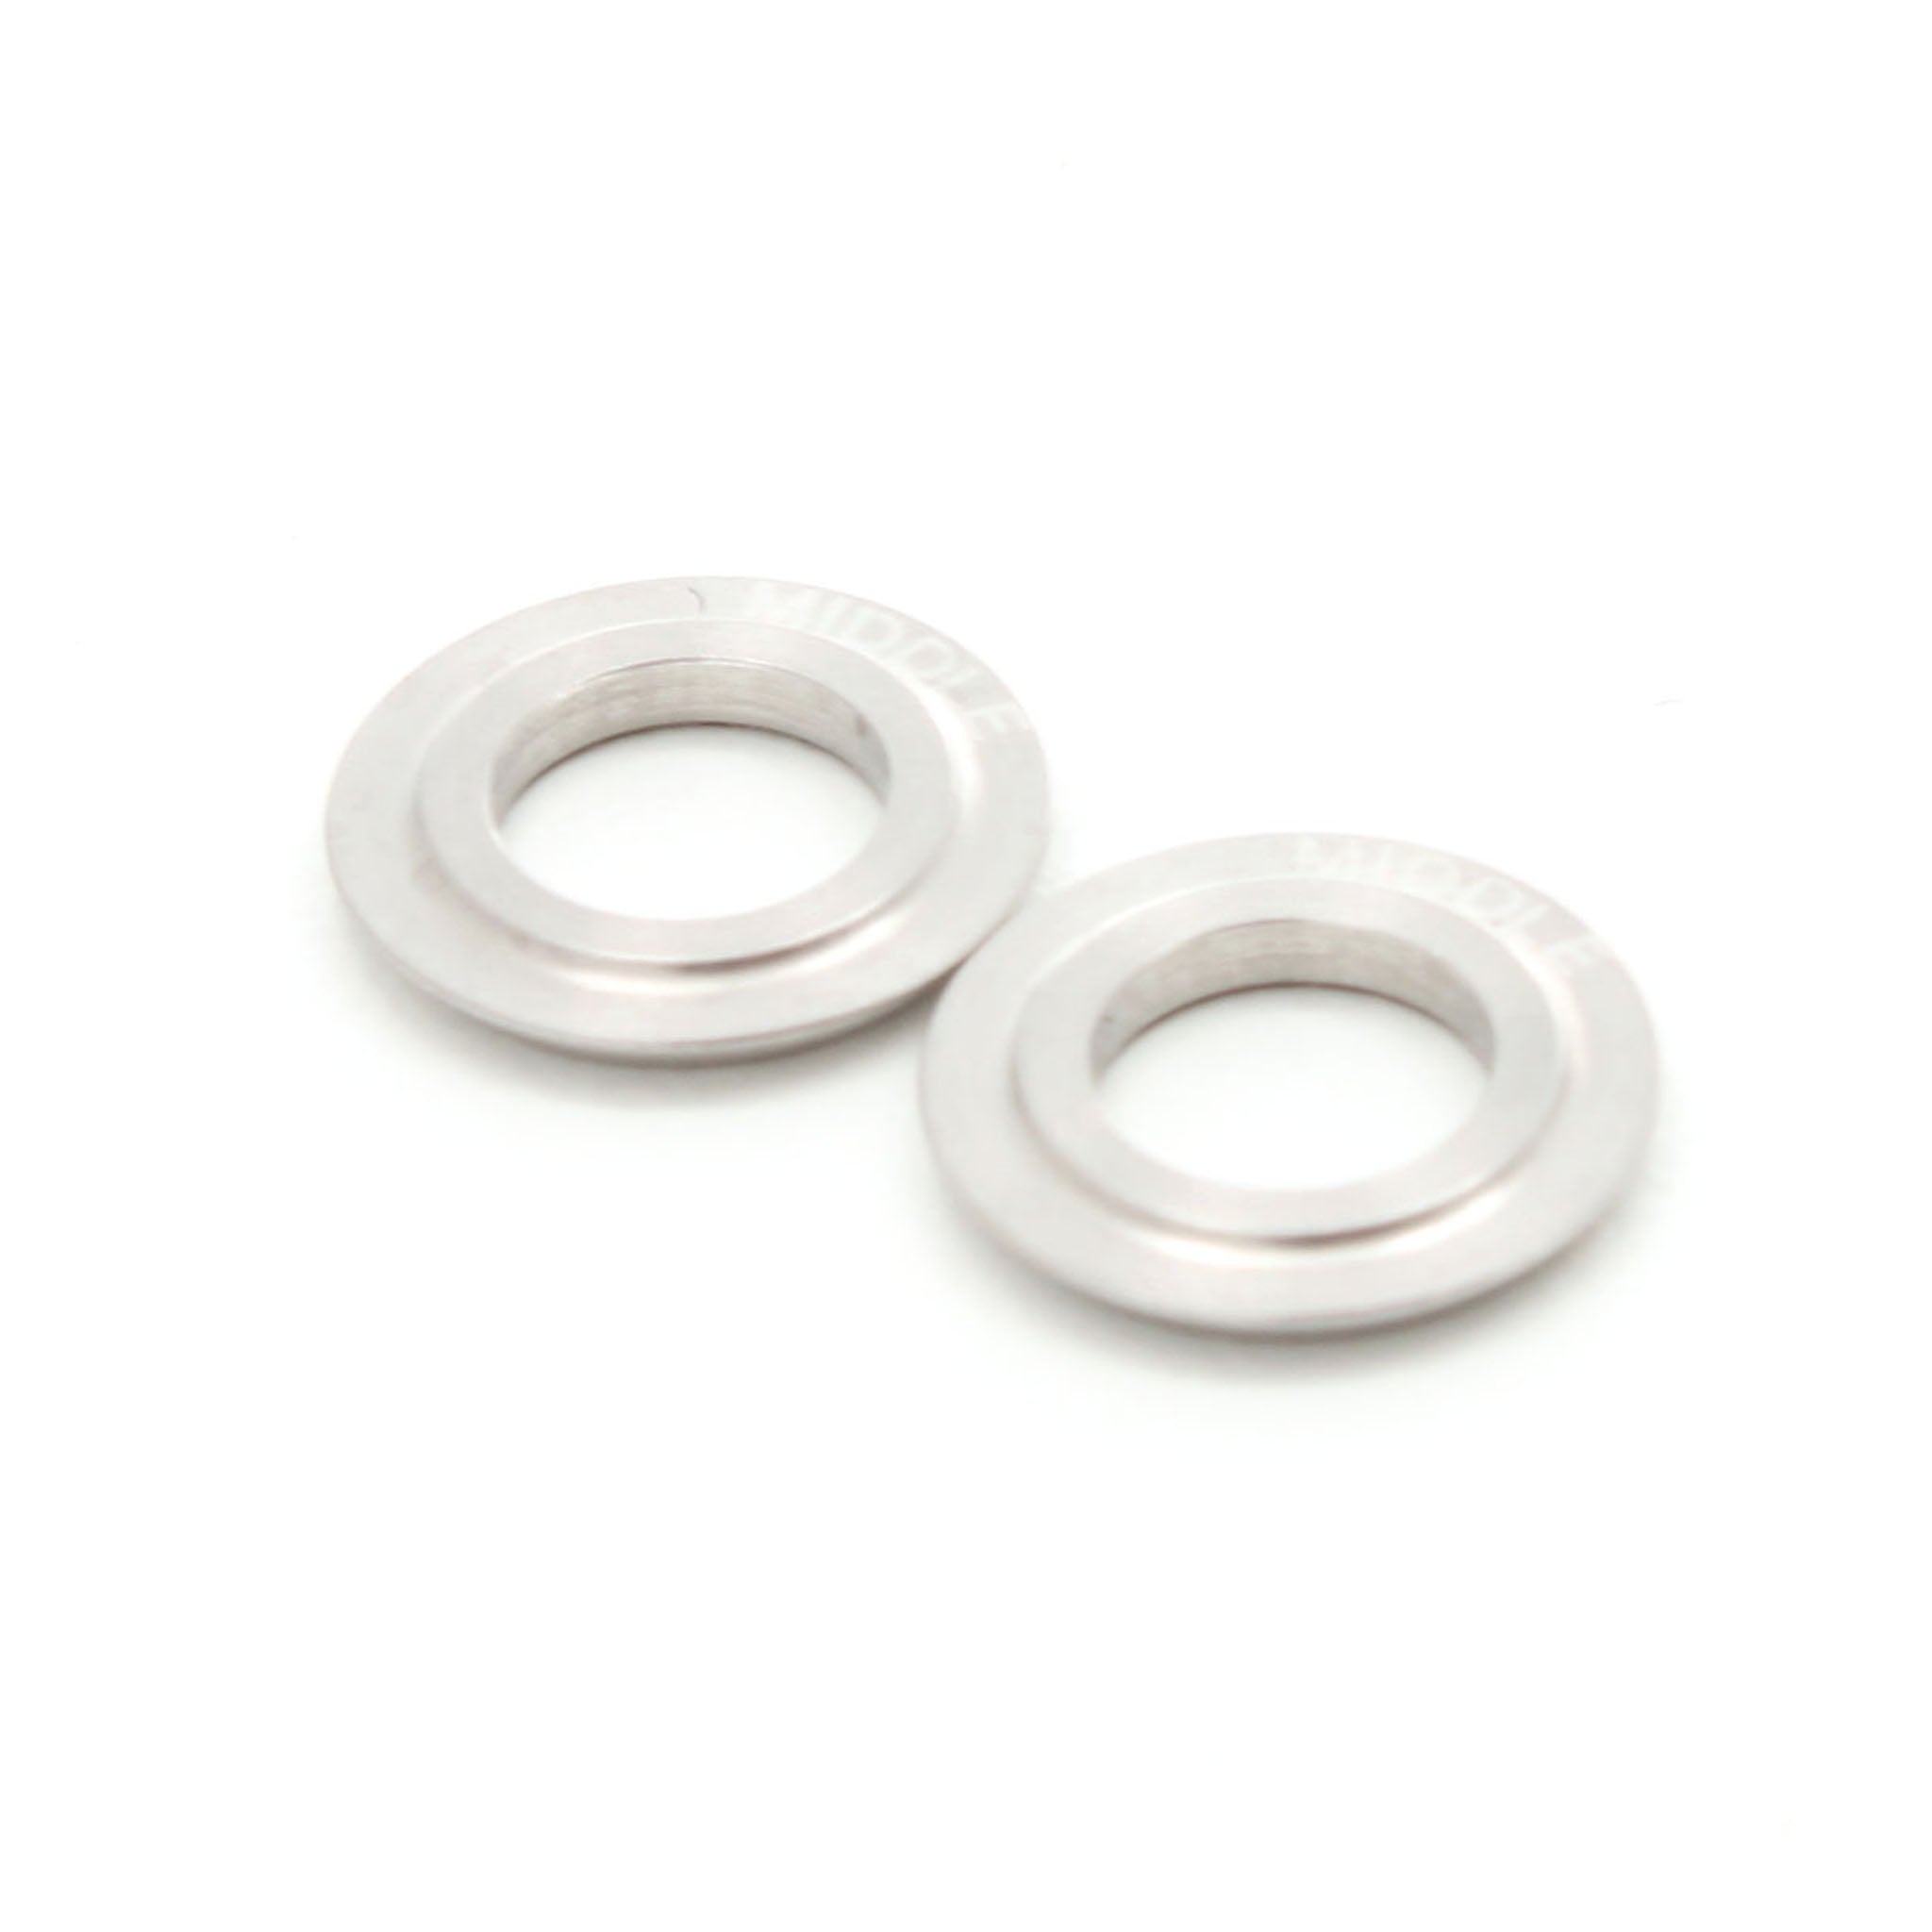 C3 Offstring Spacers (2pcs)